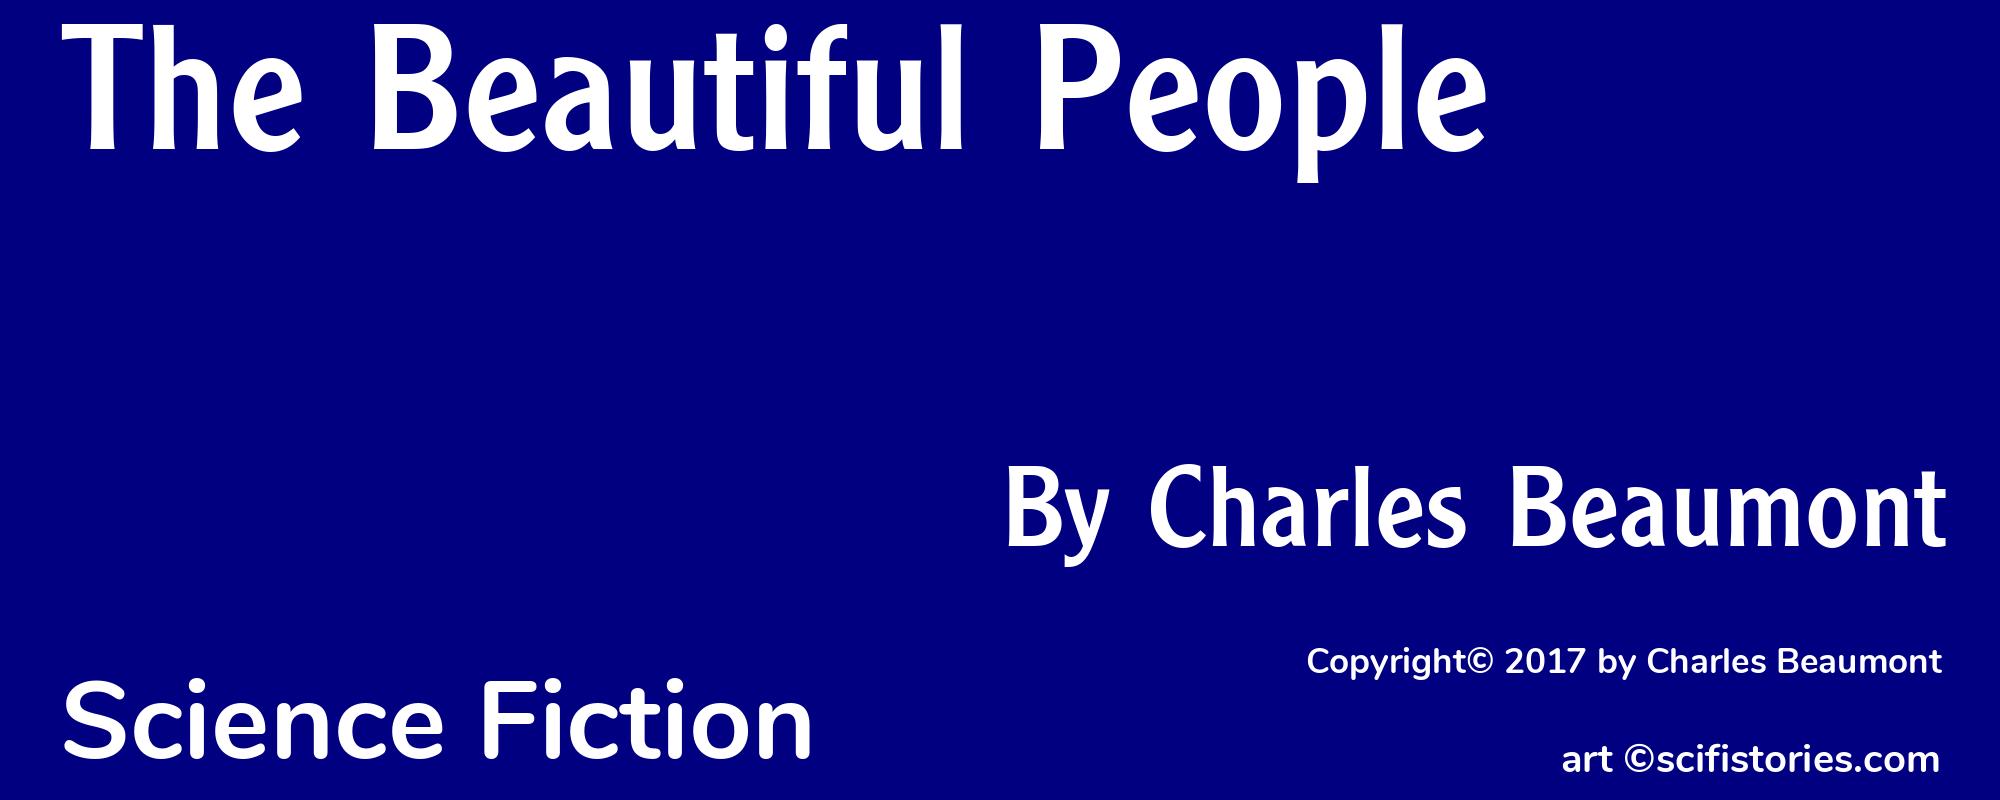 The Beautiful People - Cover